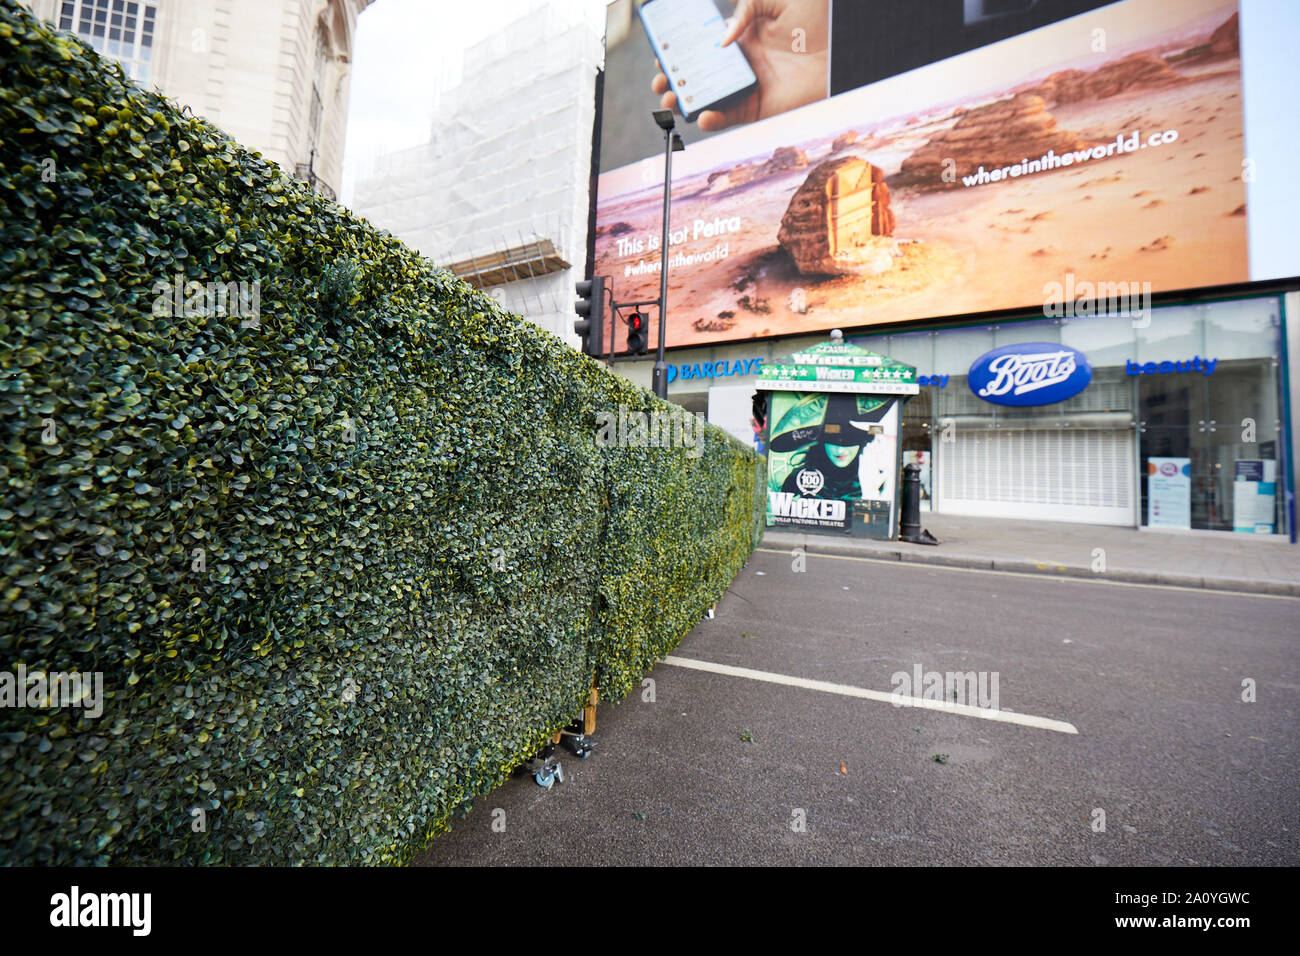 London, U.K. - Sept 22, 2019: An artifical hedge placed along Regent Street as part of activties across the capital to mark London car-free day. Stock Photo